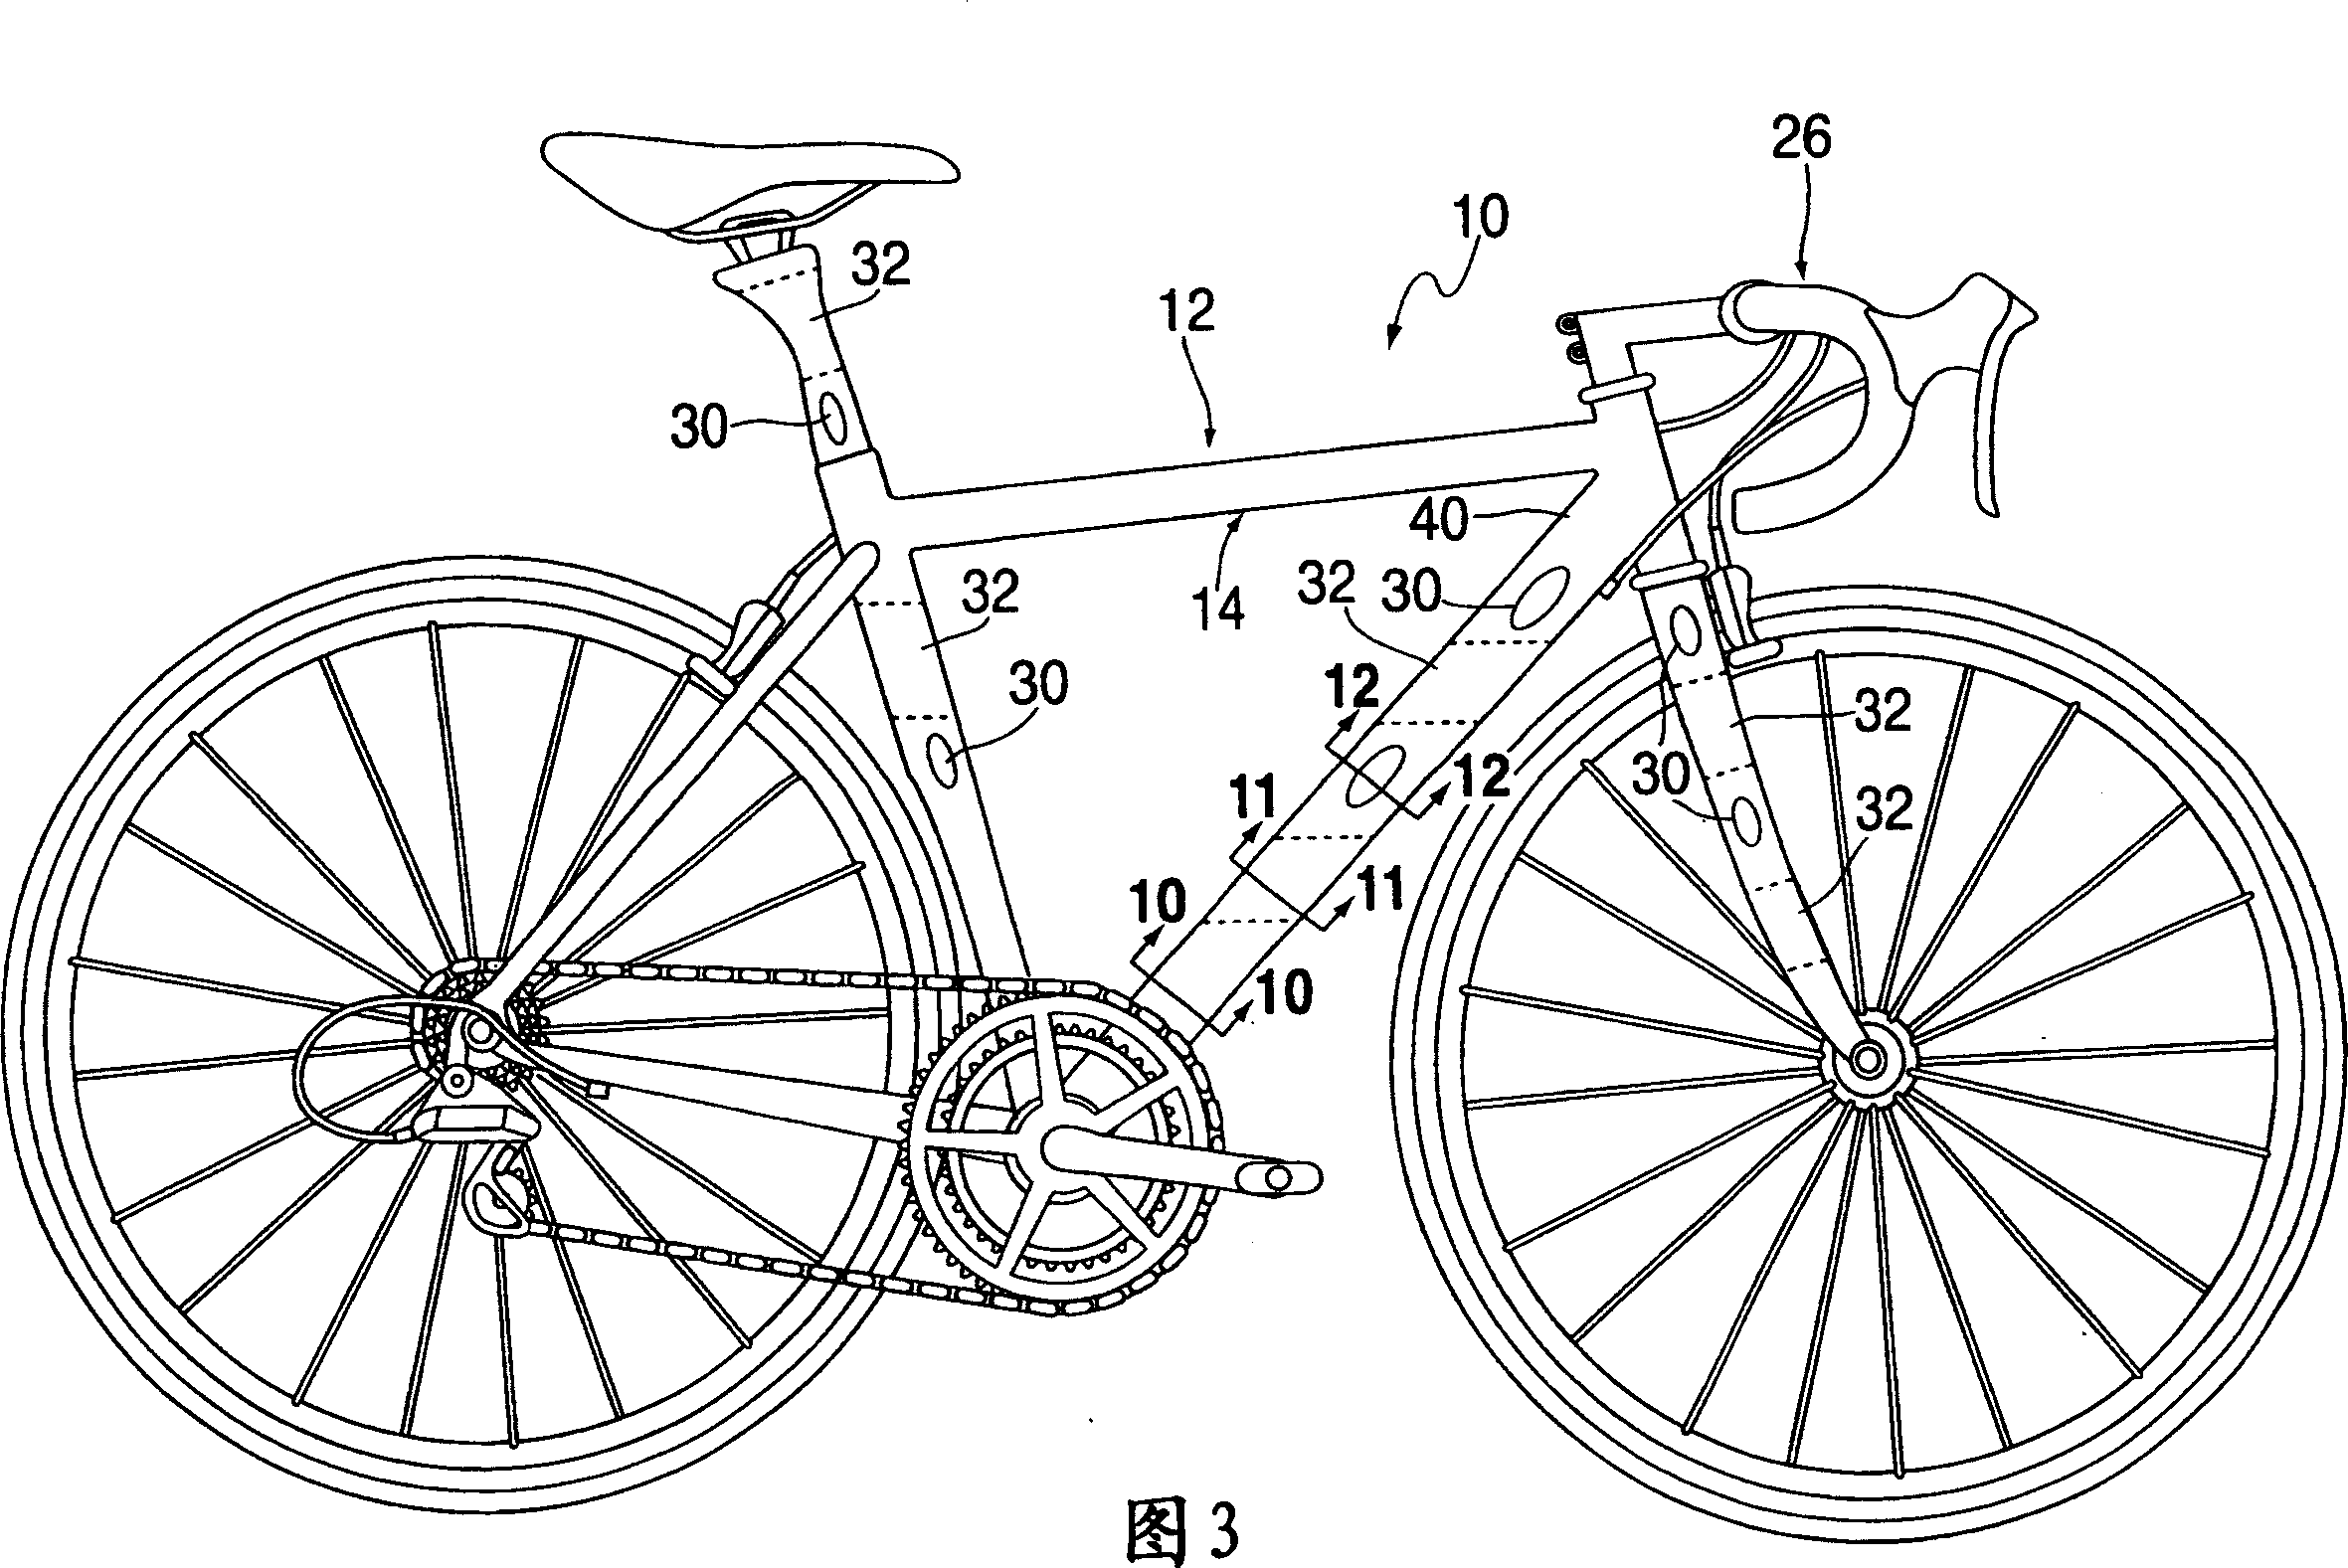 Bicycle having multiple tube frame structure.